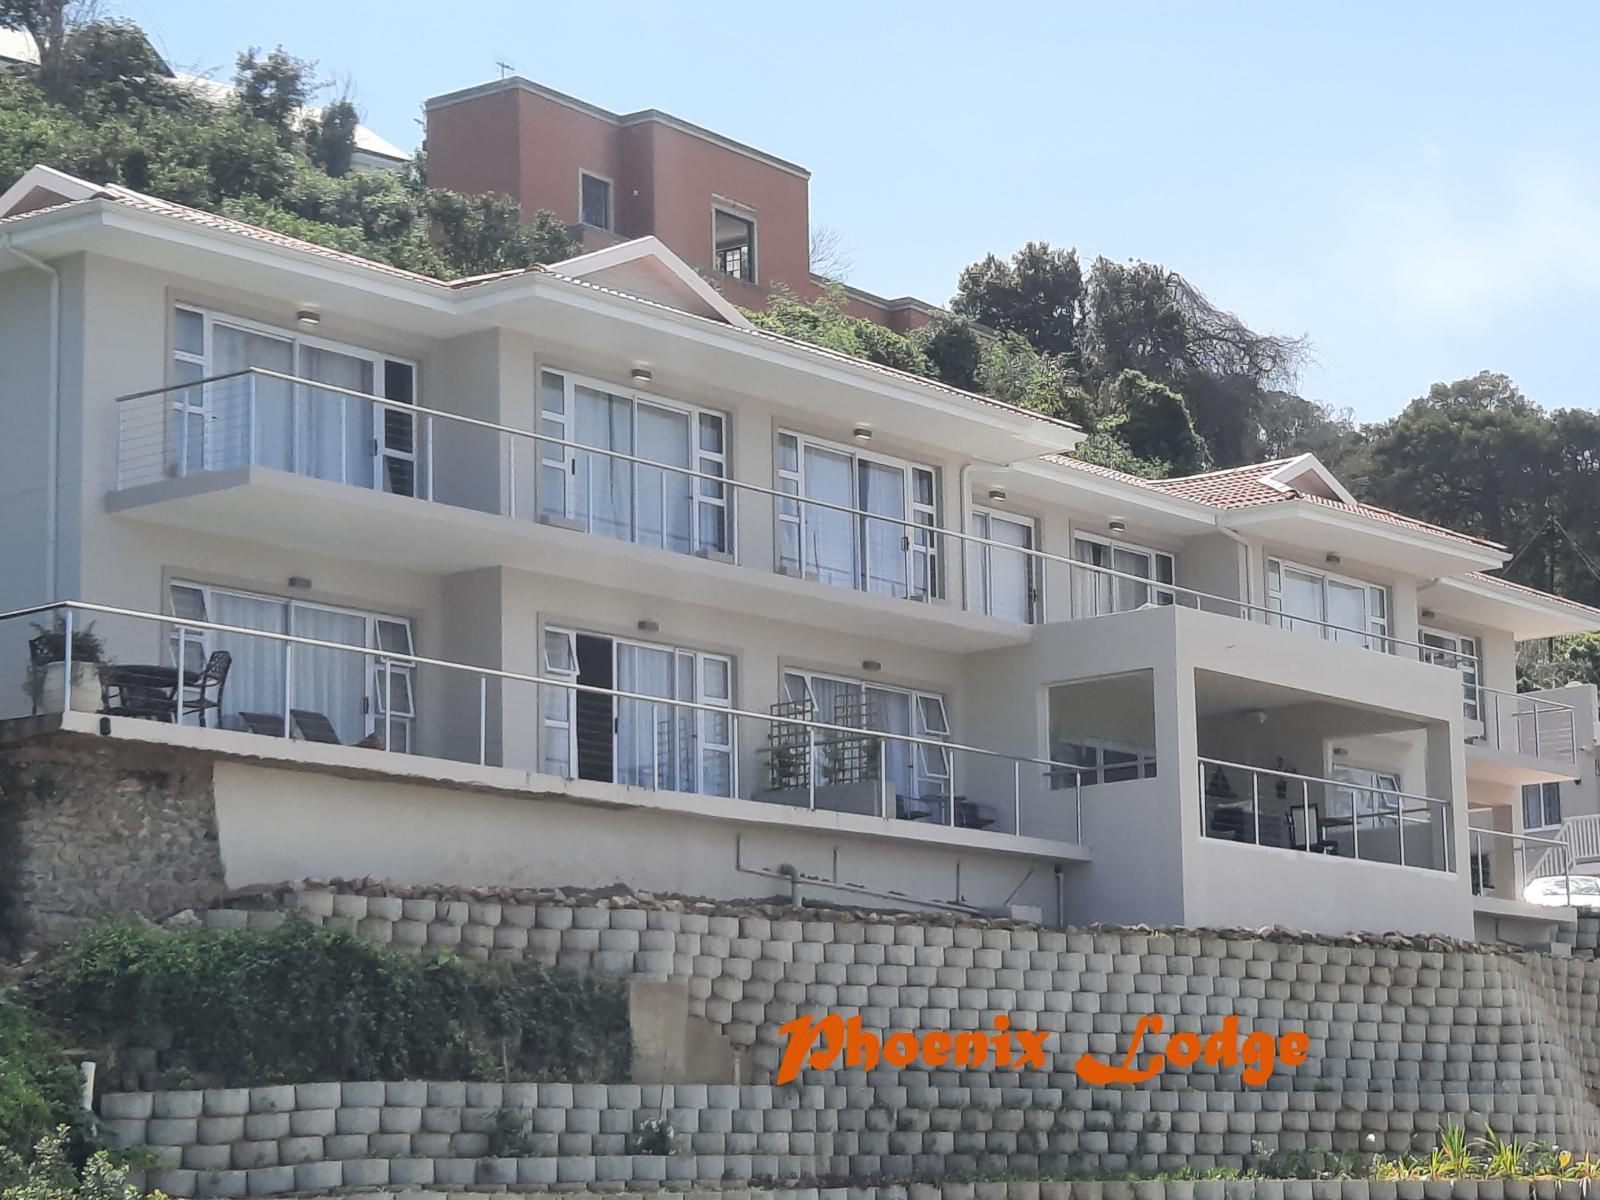 Phoenix Lodge And Waterside Accommodation Paradise Knysna Western Cape South Africa Balcony, Architecture, House, Building